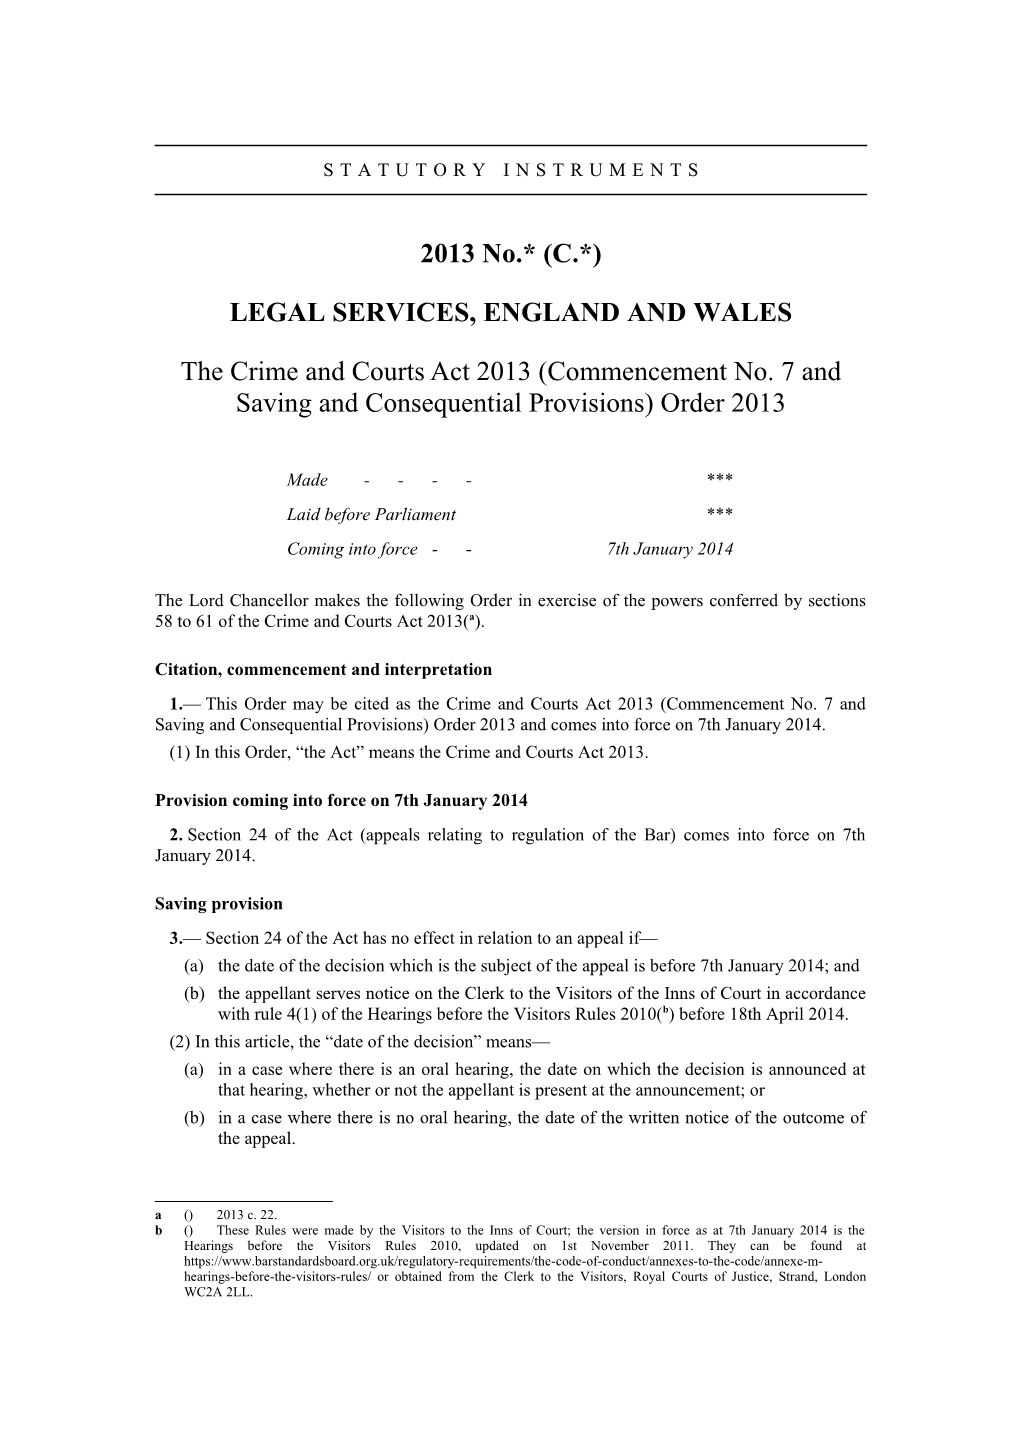 Legal Services, England and Wales